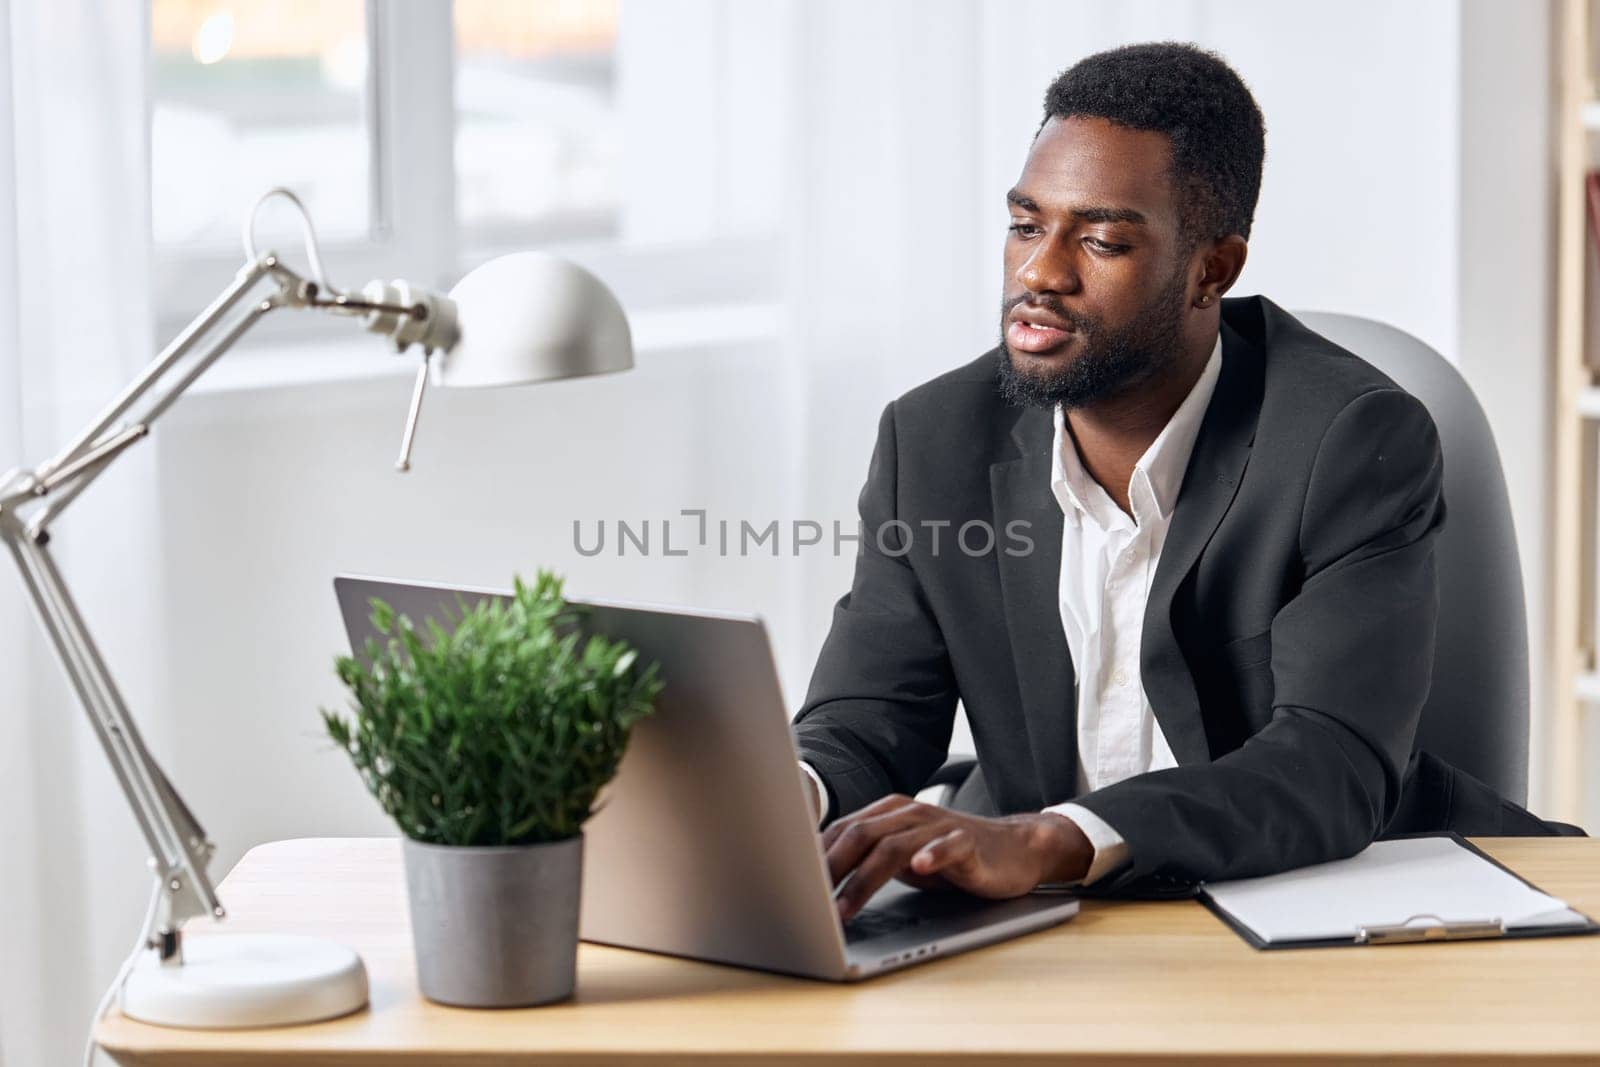 job man computer office online laptop modern space american desk cyberspace workplace call looking person manager worker black freelancer african education student copy